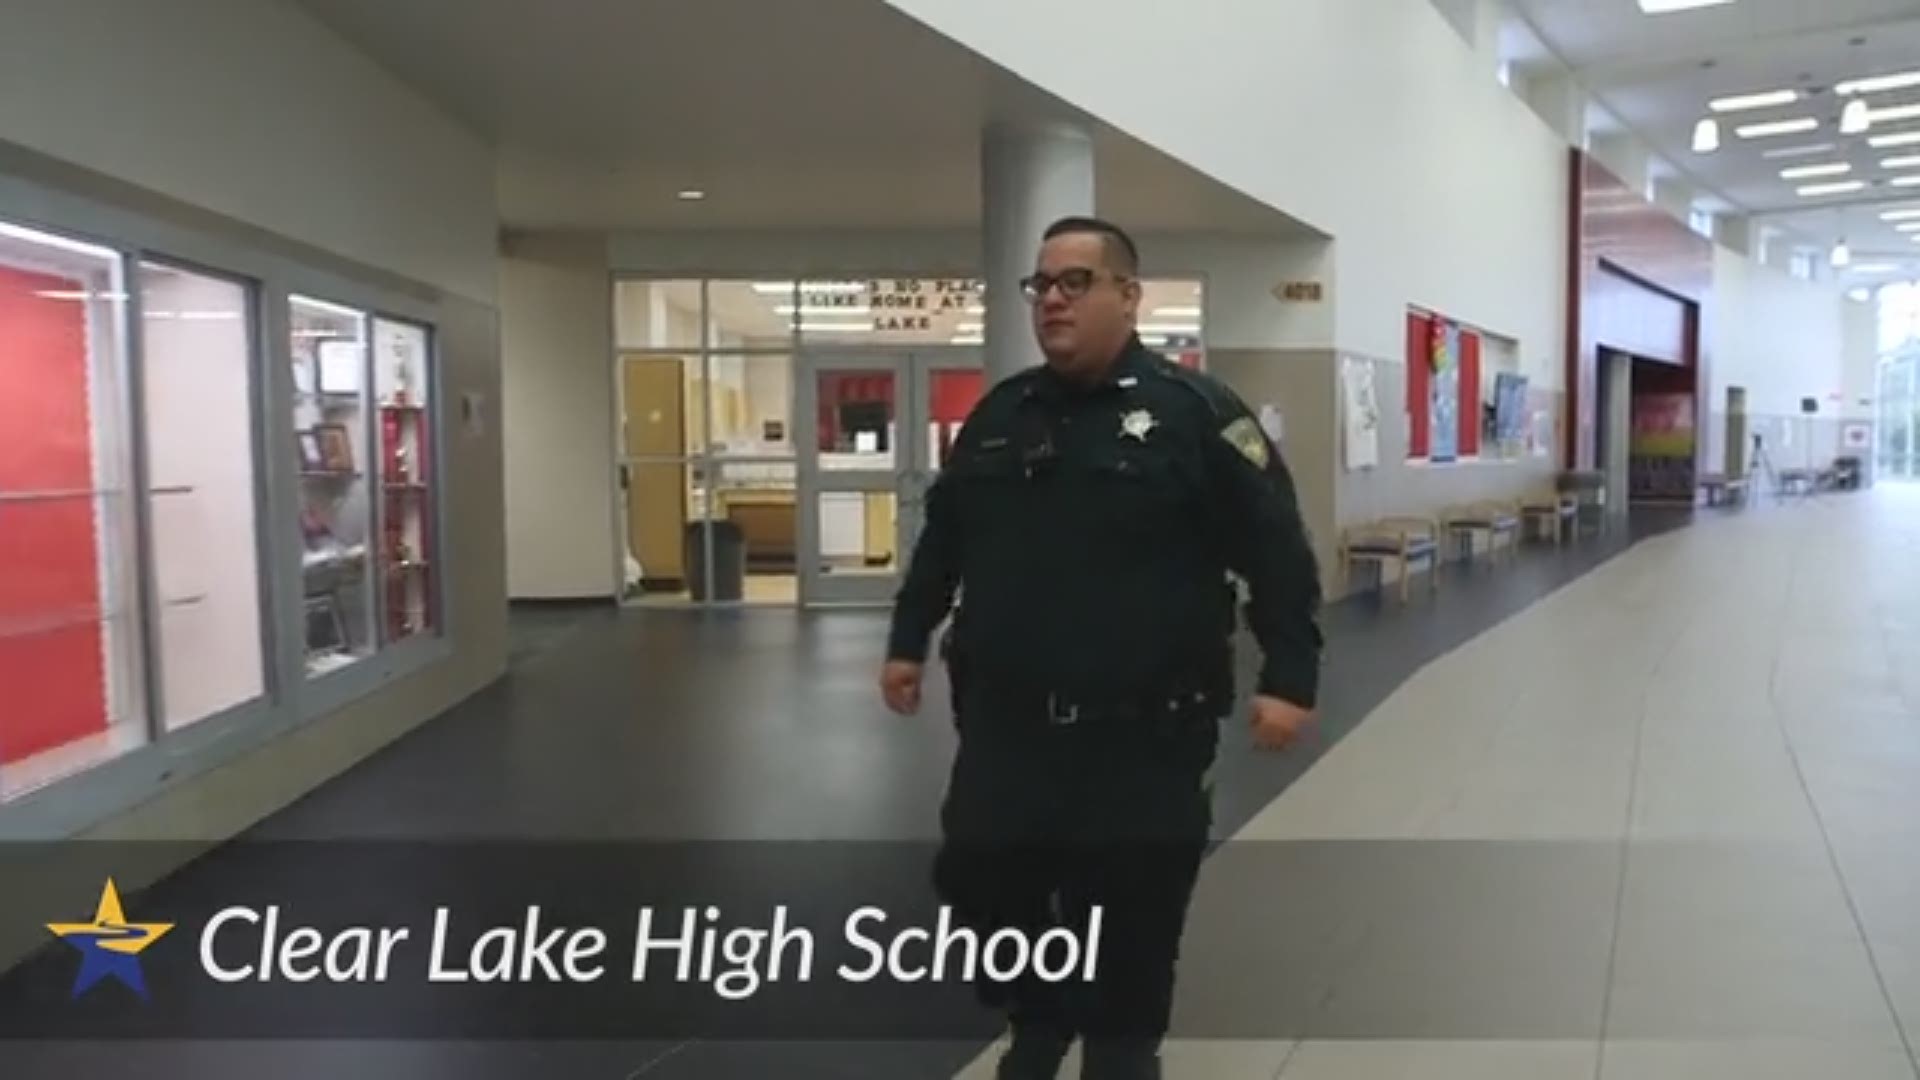 We can a learn a thing or two from some talented and amazing Clear Lake ISD students who provided support for a school liaison officer and his son battling leukemia.